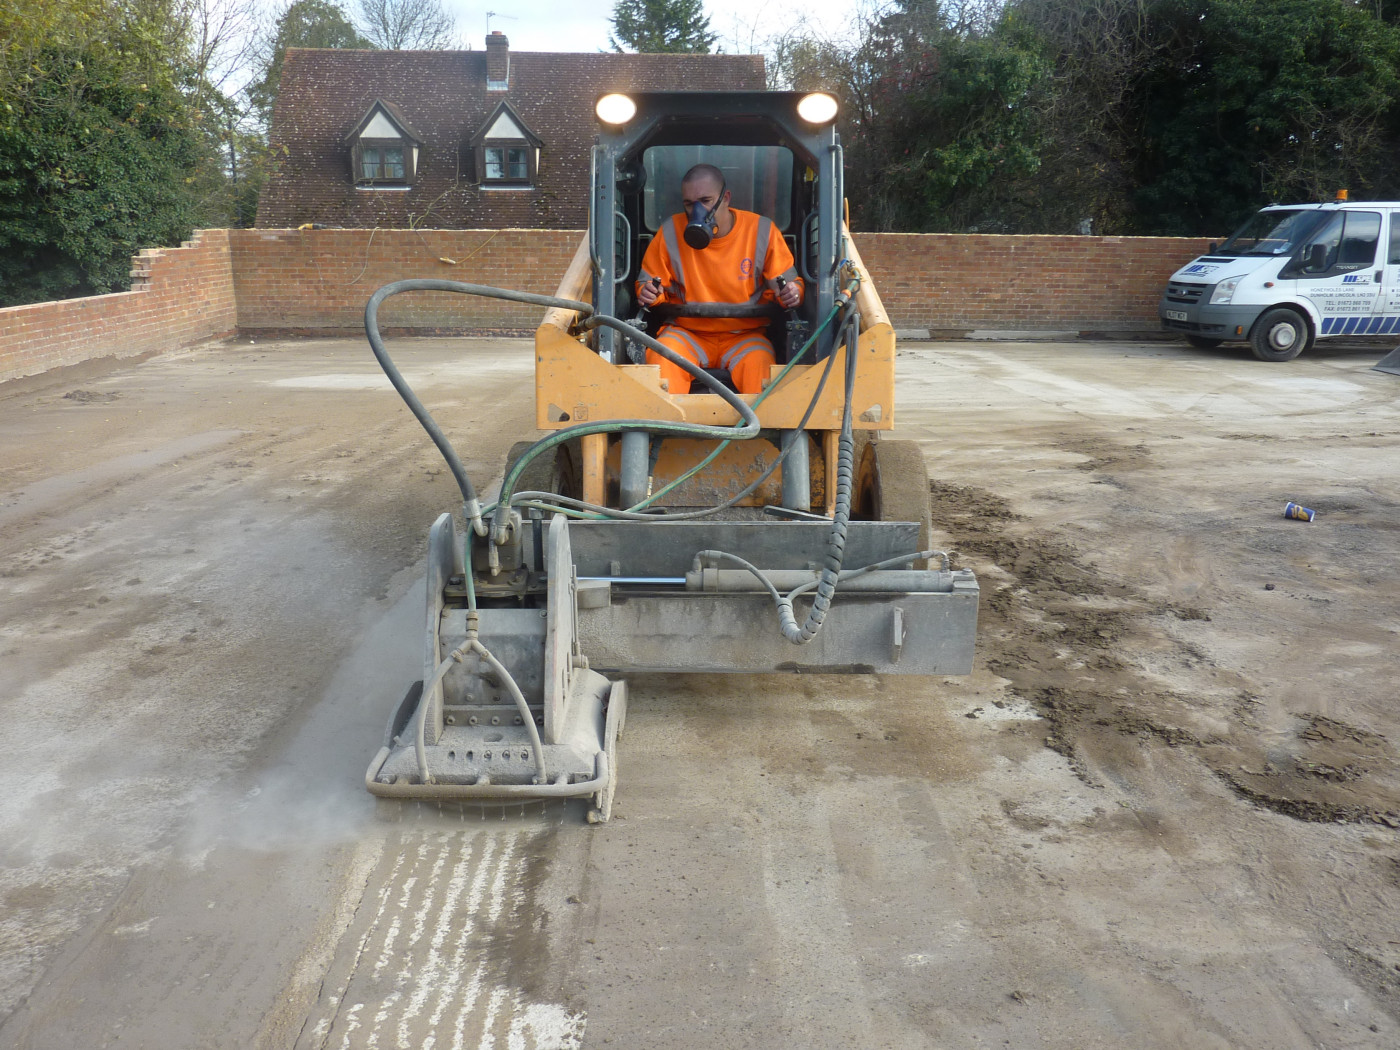 Rotary grinding to remove old profile from car park surface